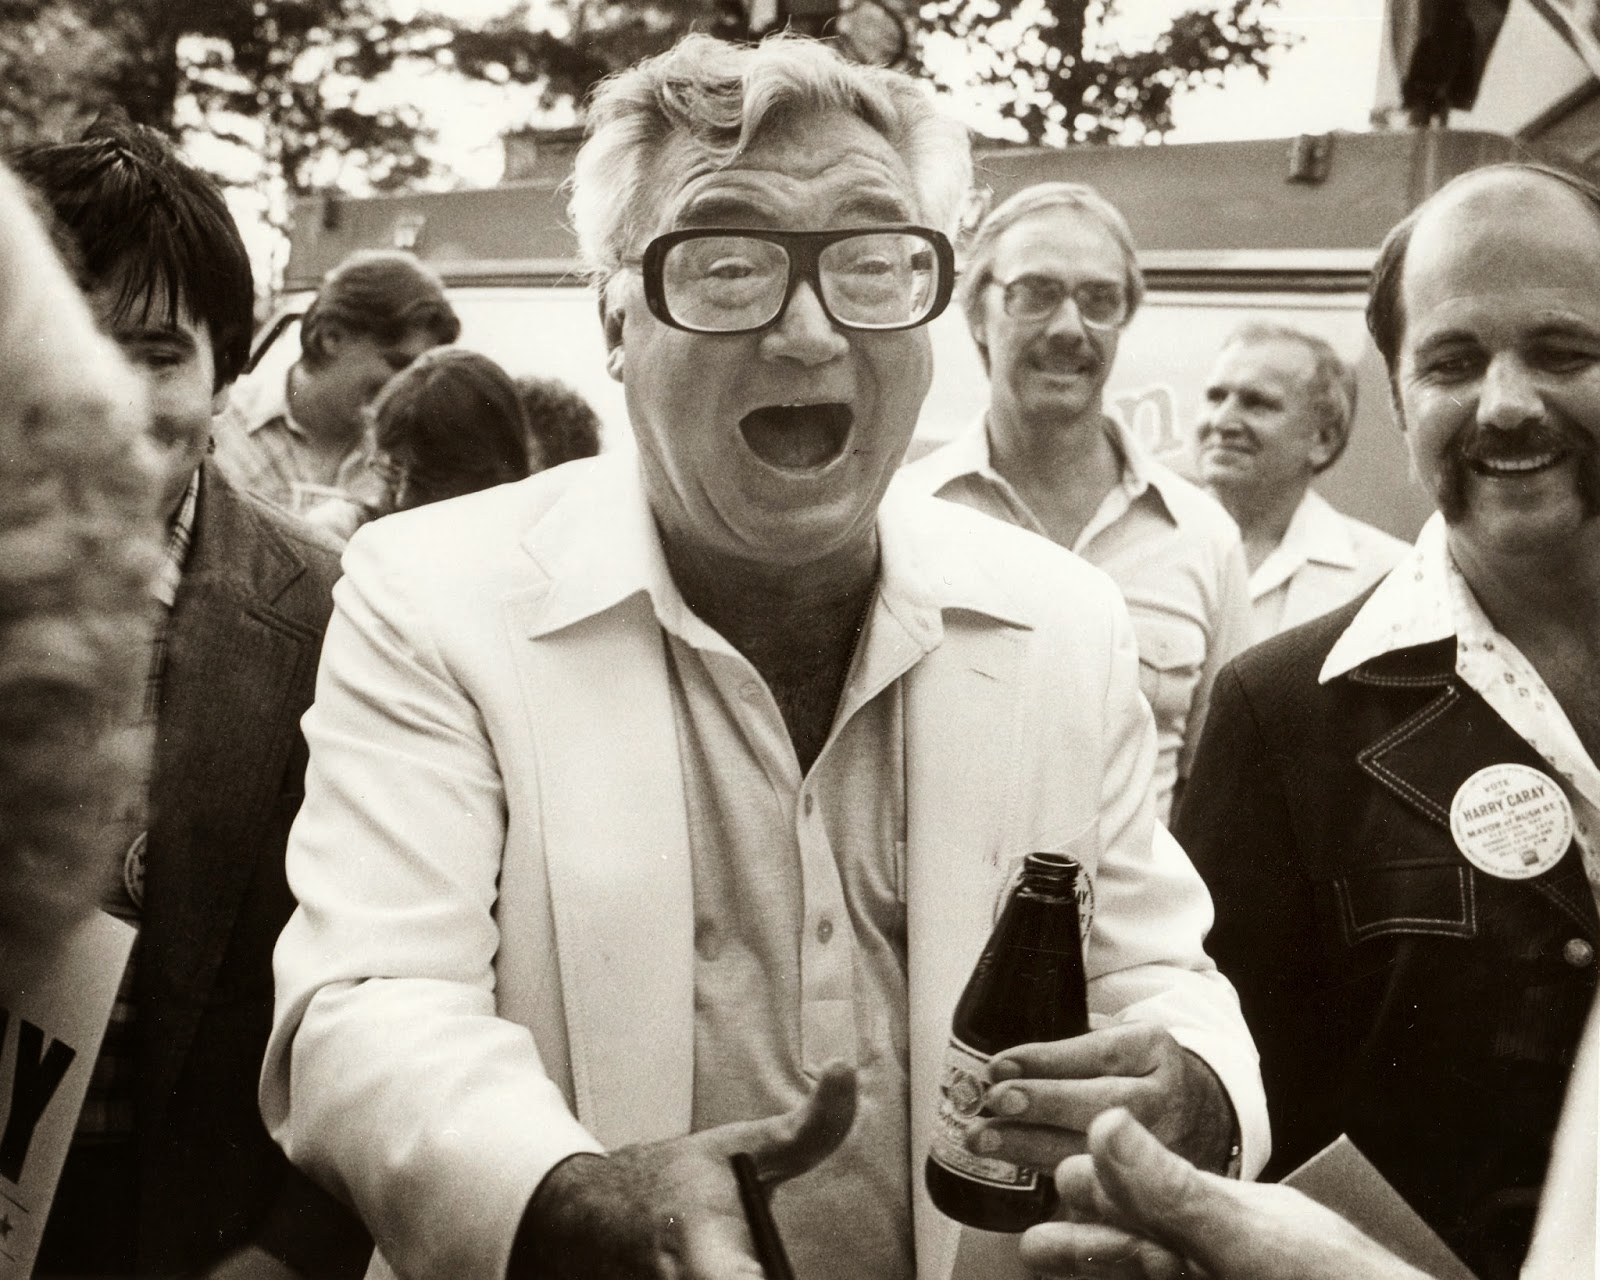 288 consecutive nights in bars—Harry Caray in 1972.